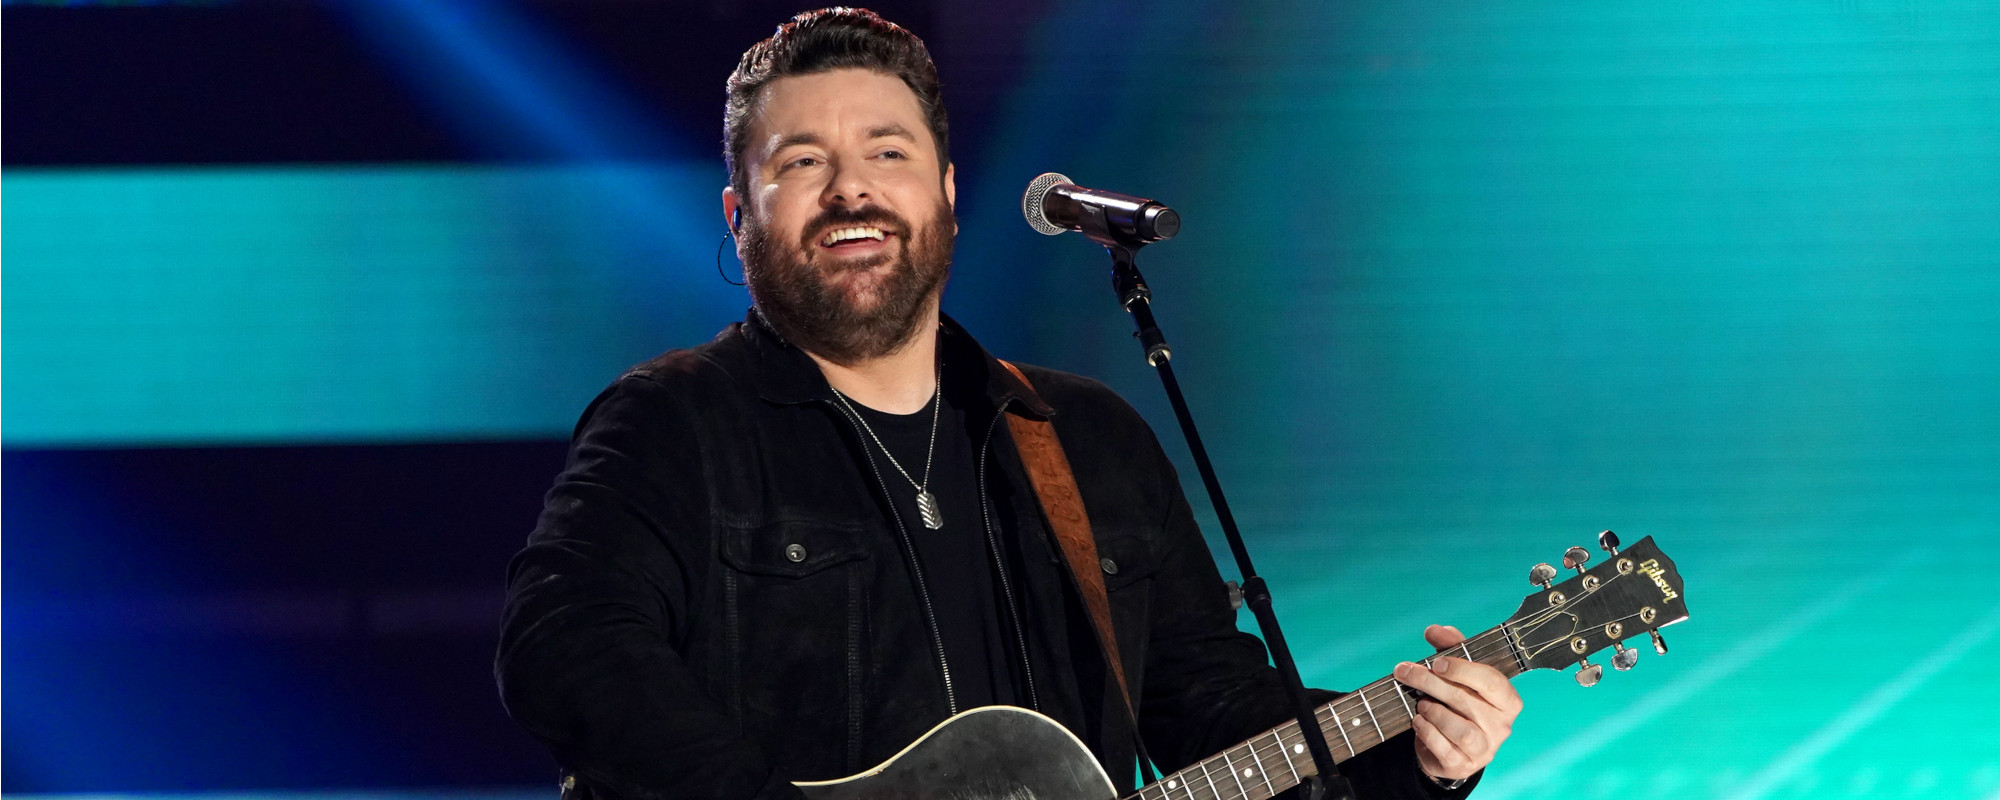 Chris Young Cleared of All Charges After Nashville Arrest